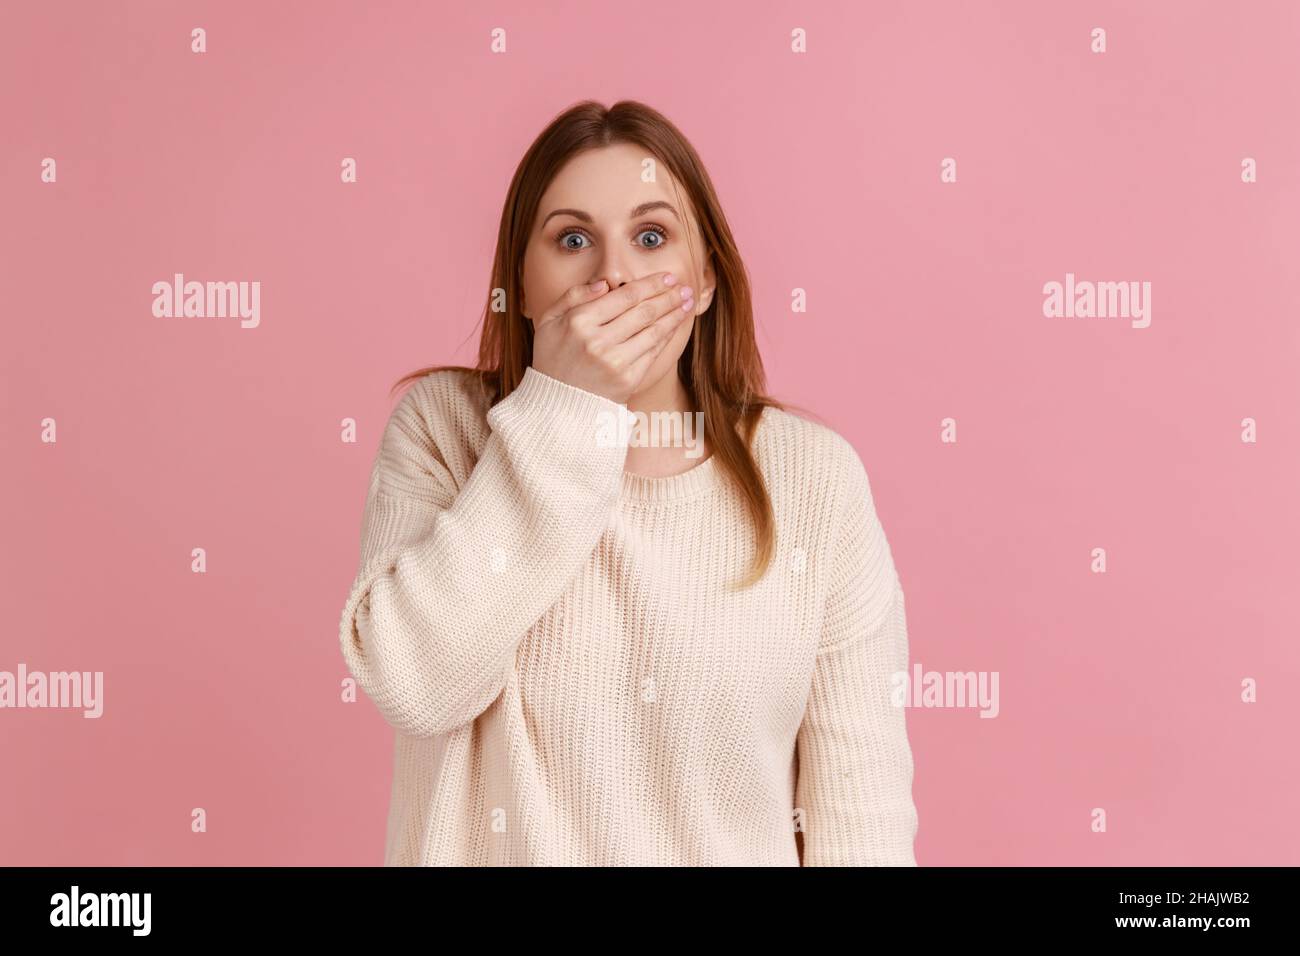 Portrait of shocked blond woman put hand on mouth and looking with fear in her eyes, keeping terrible secret, wearing white sweater. Indoor studio shot isolated on pink background. Stock Photo